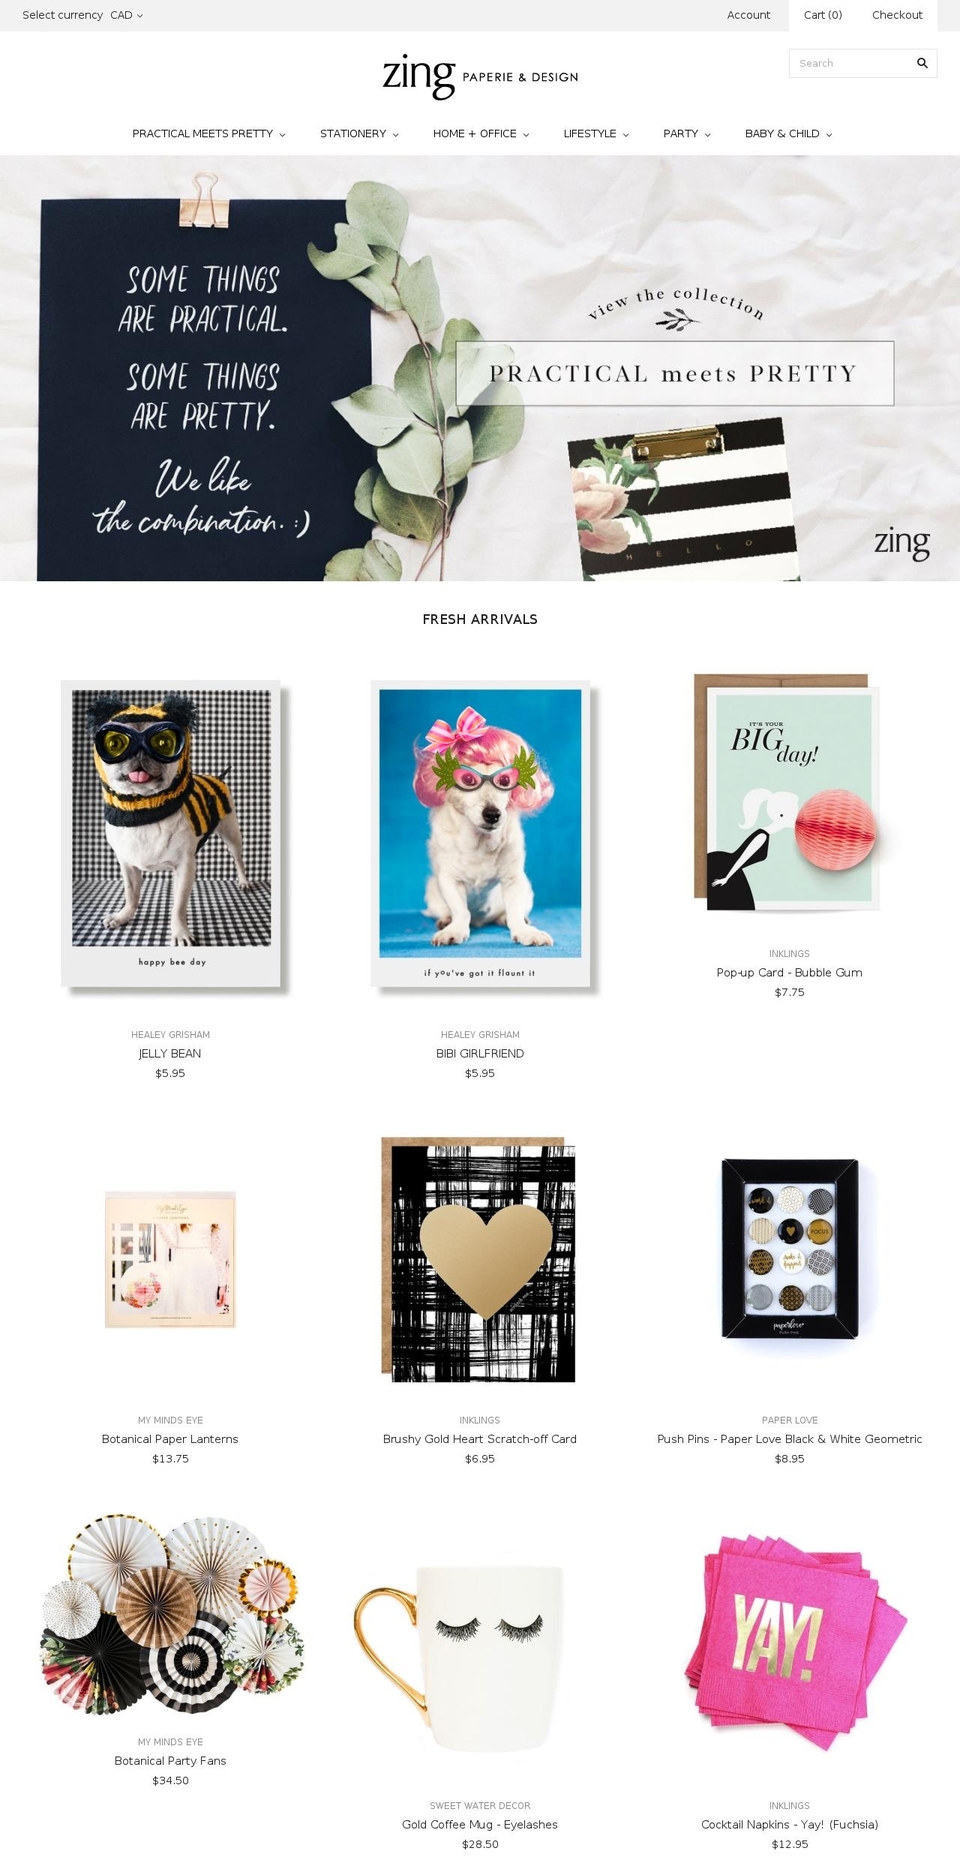 Copy of Grid Shopify theme site example zingpaperie.ca